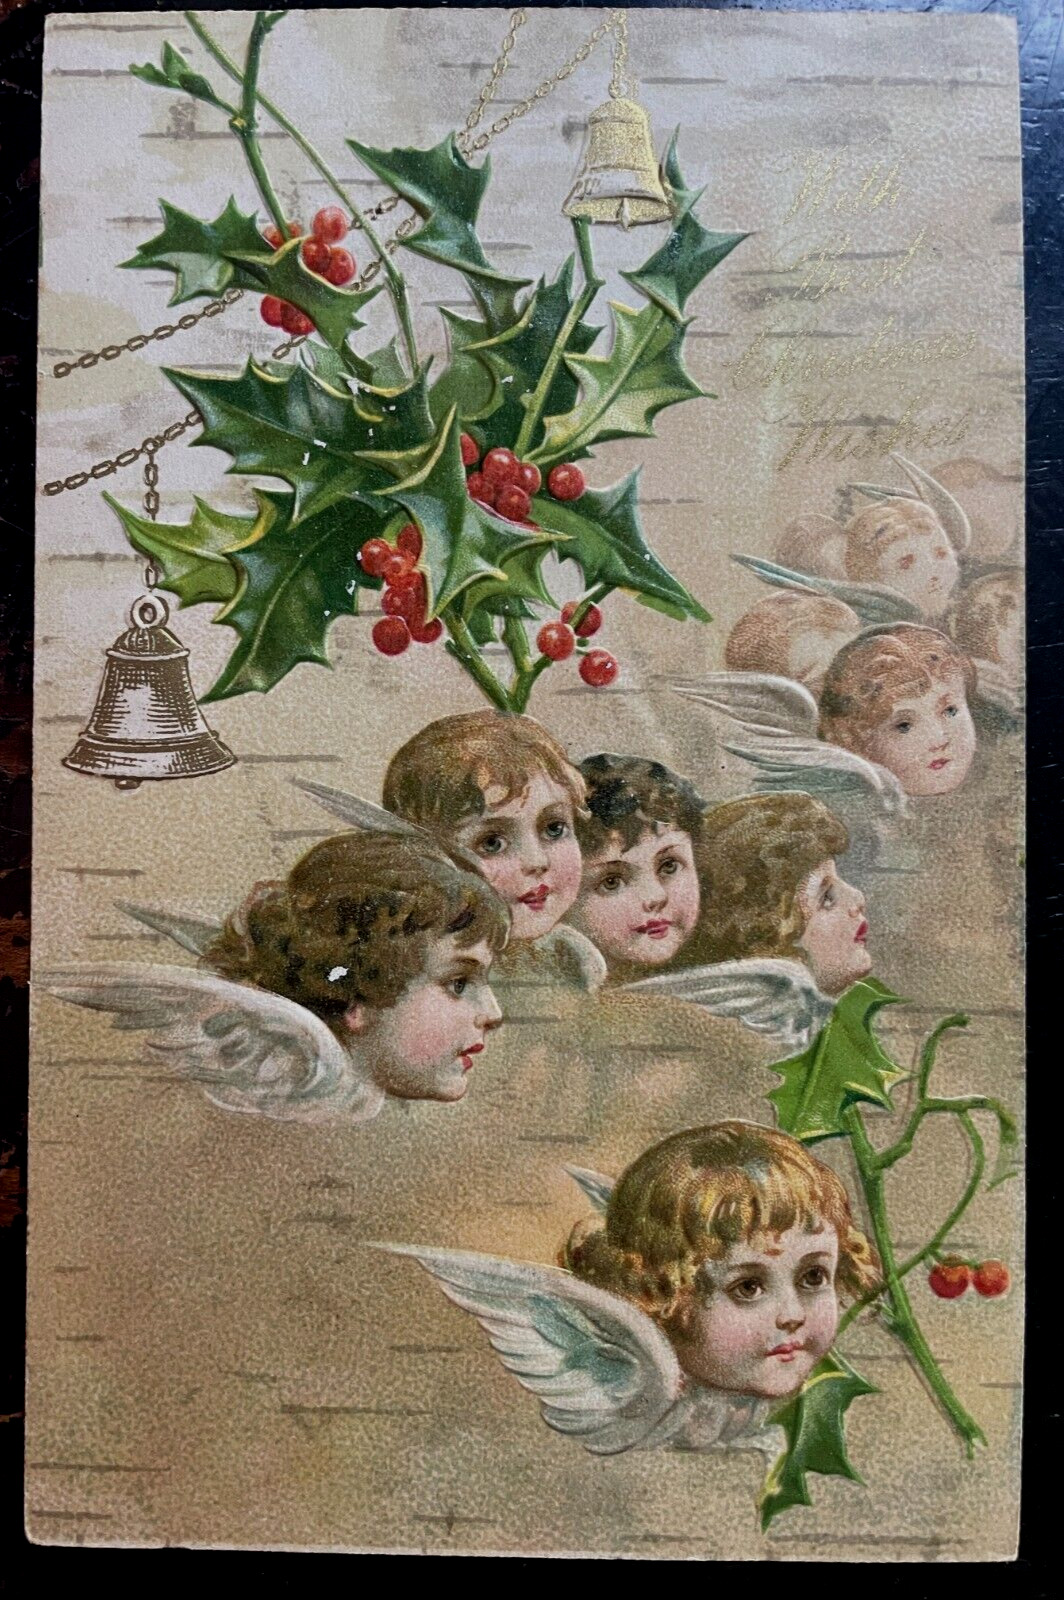 Vintage Victorian Postcard 1910 With Best Christmas Wishes - Adorable Angels